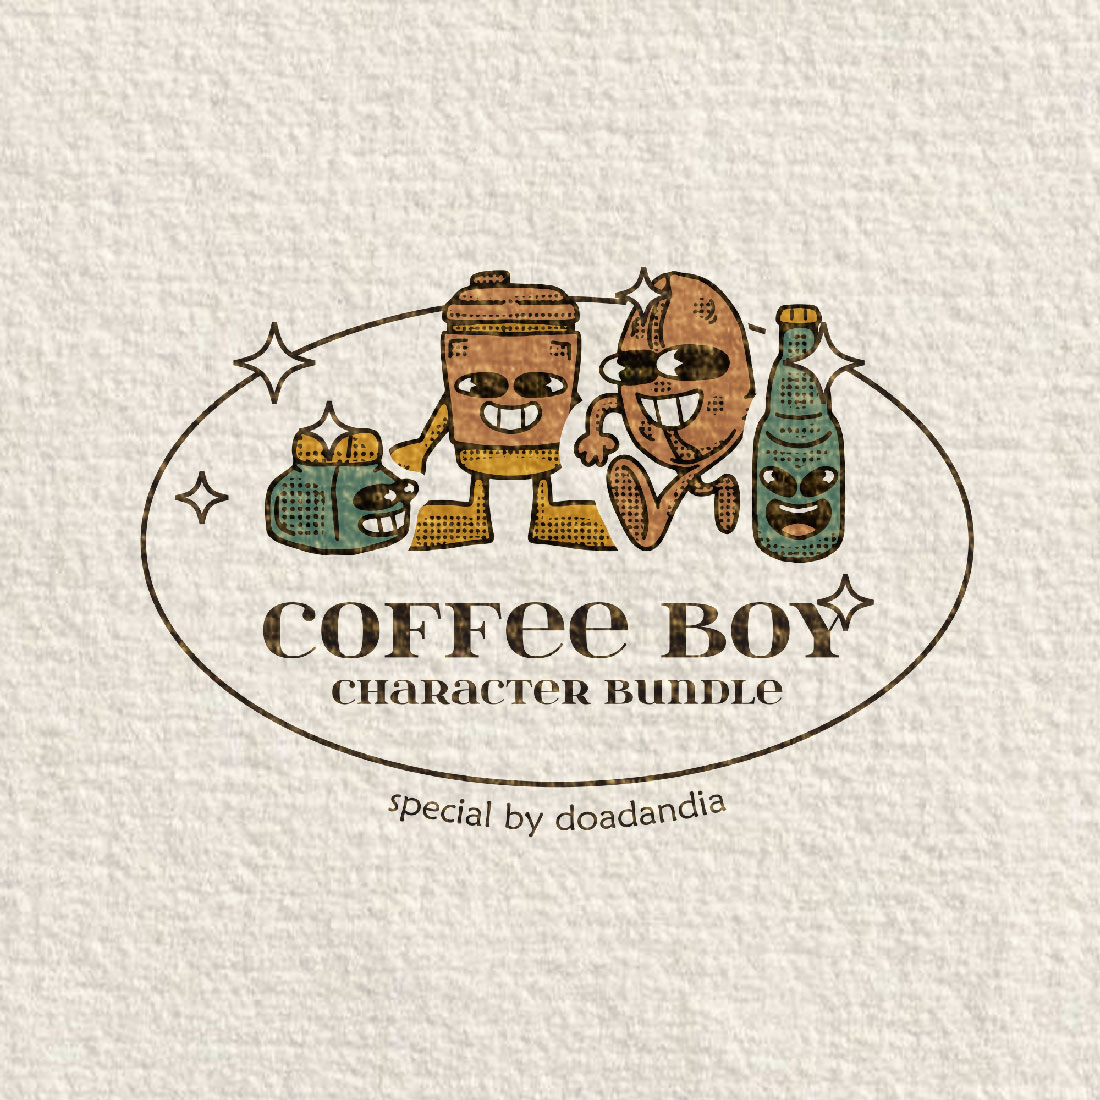 Coffee Boy Character Collection cover image.